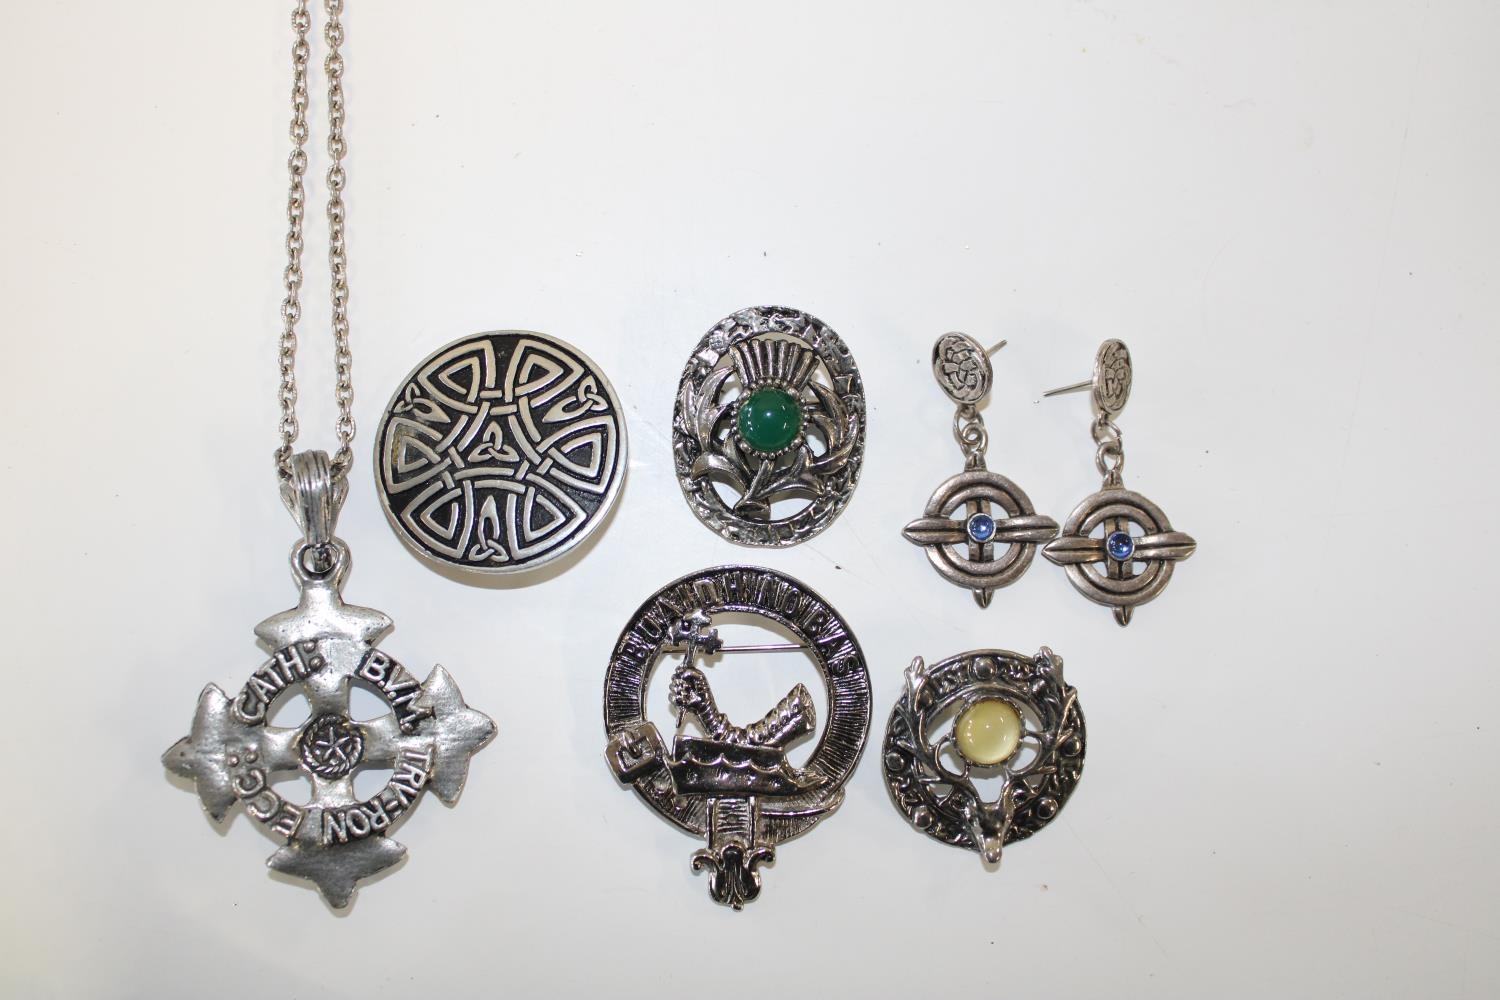 A selection of vintage Scottish costume jewellery